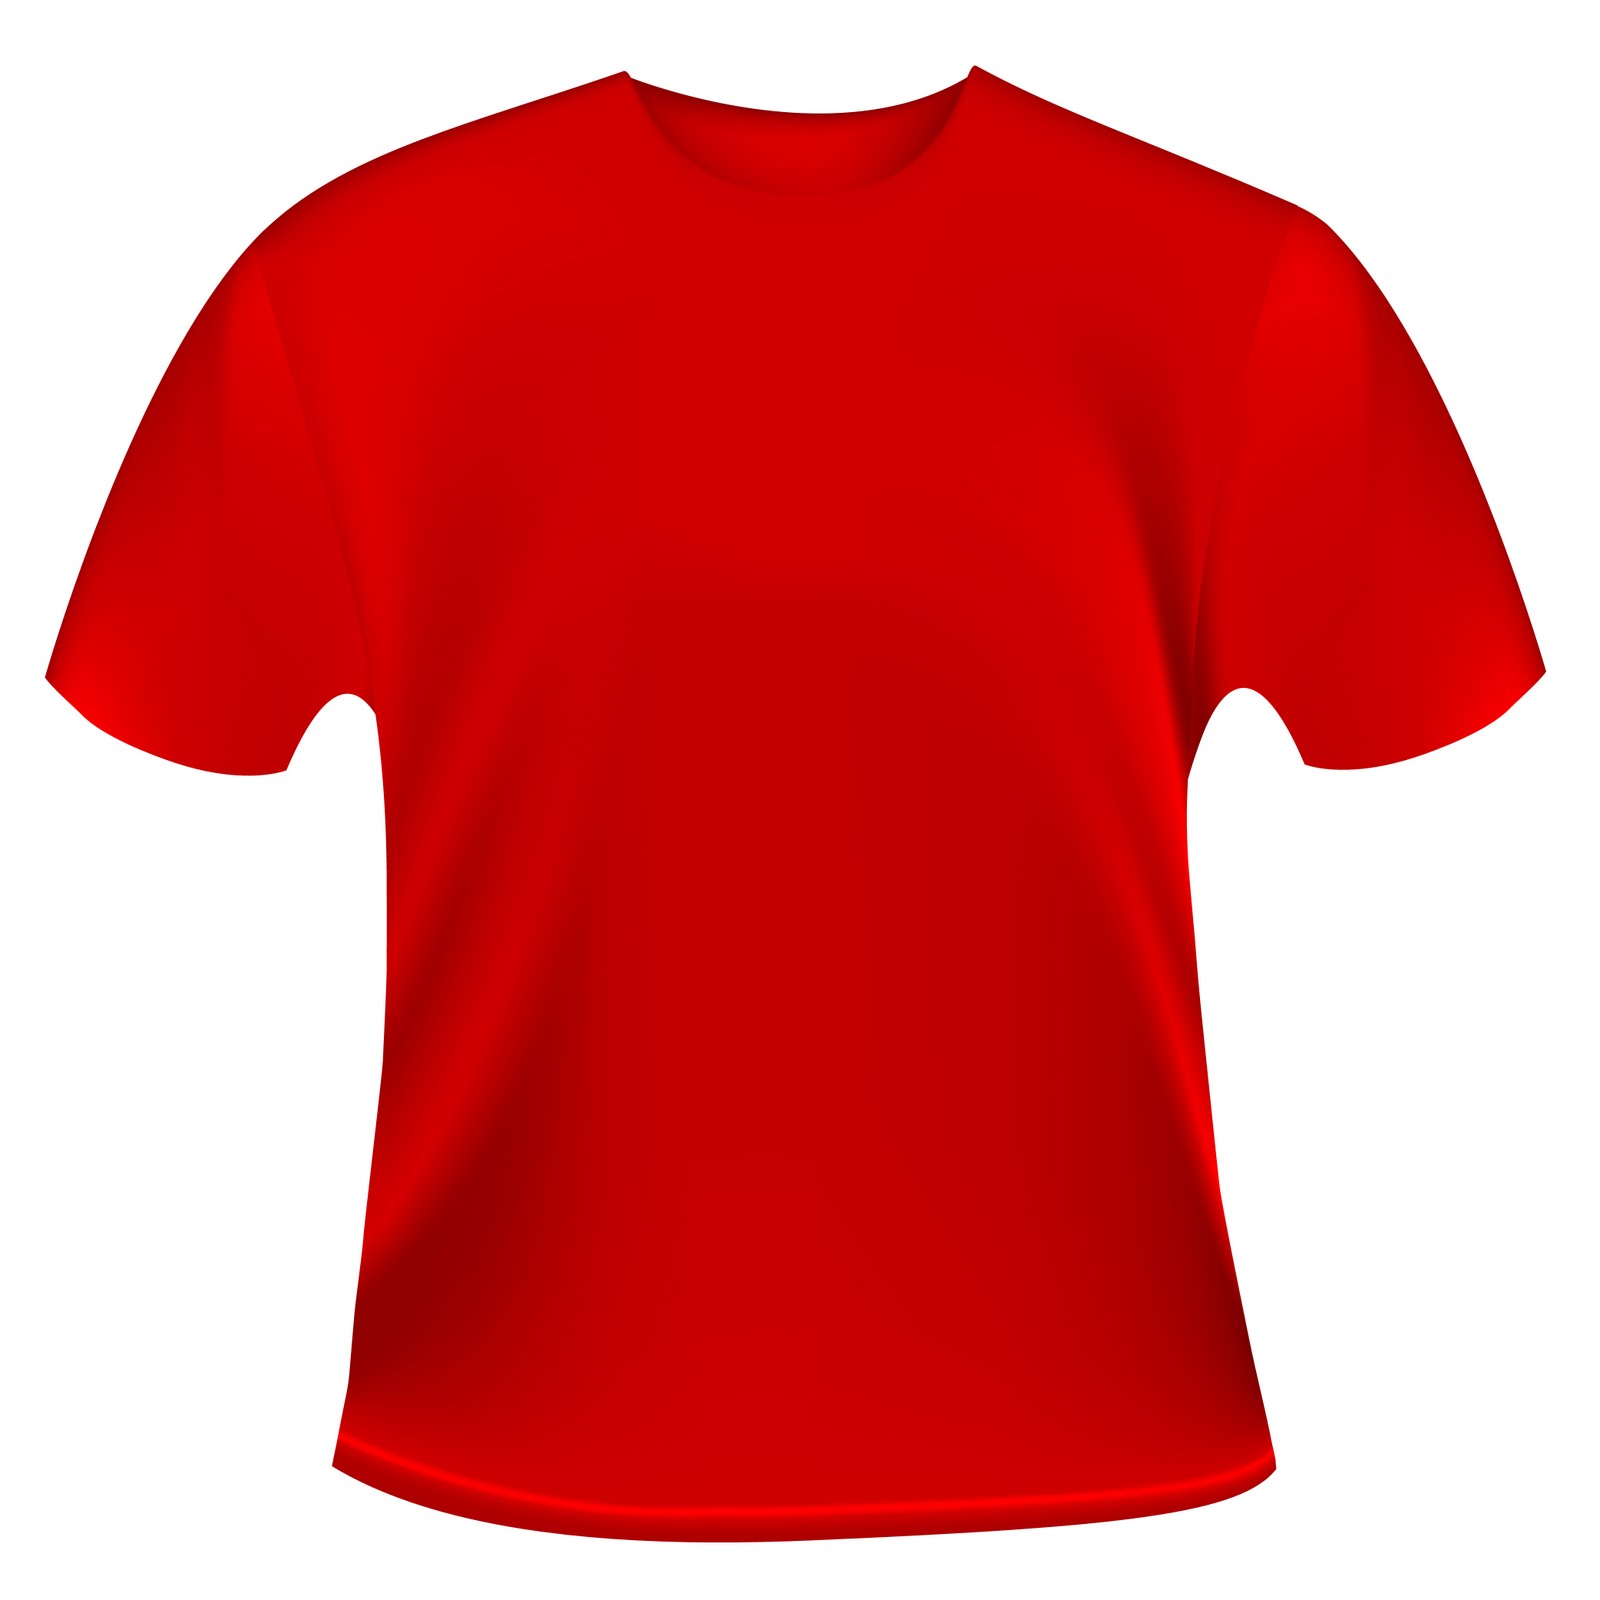 Best Photos of Red Blank T-Shirt Template - Red Blank T-Shirts ...